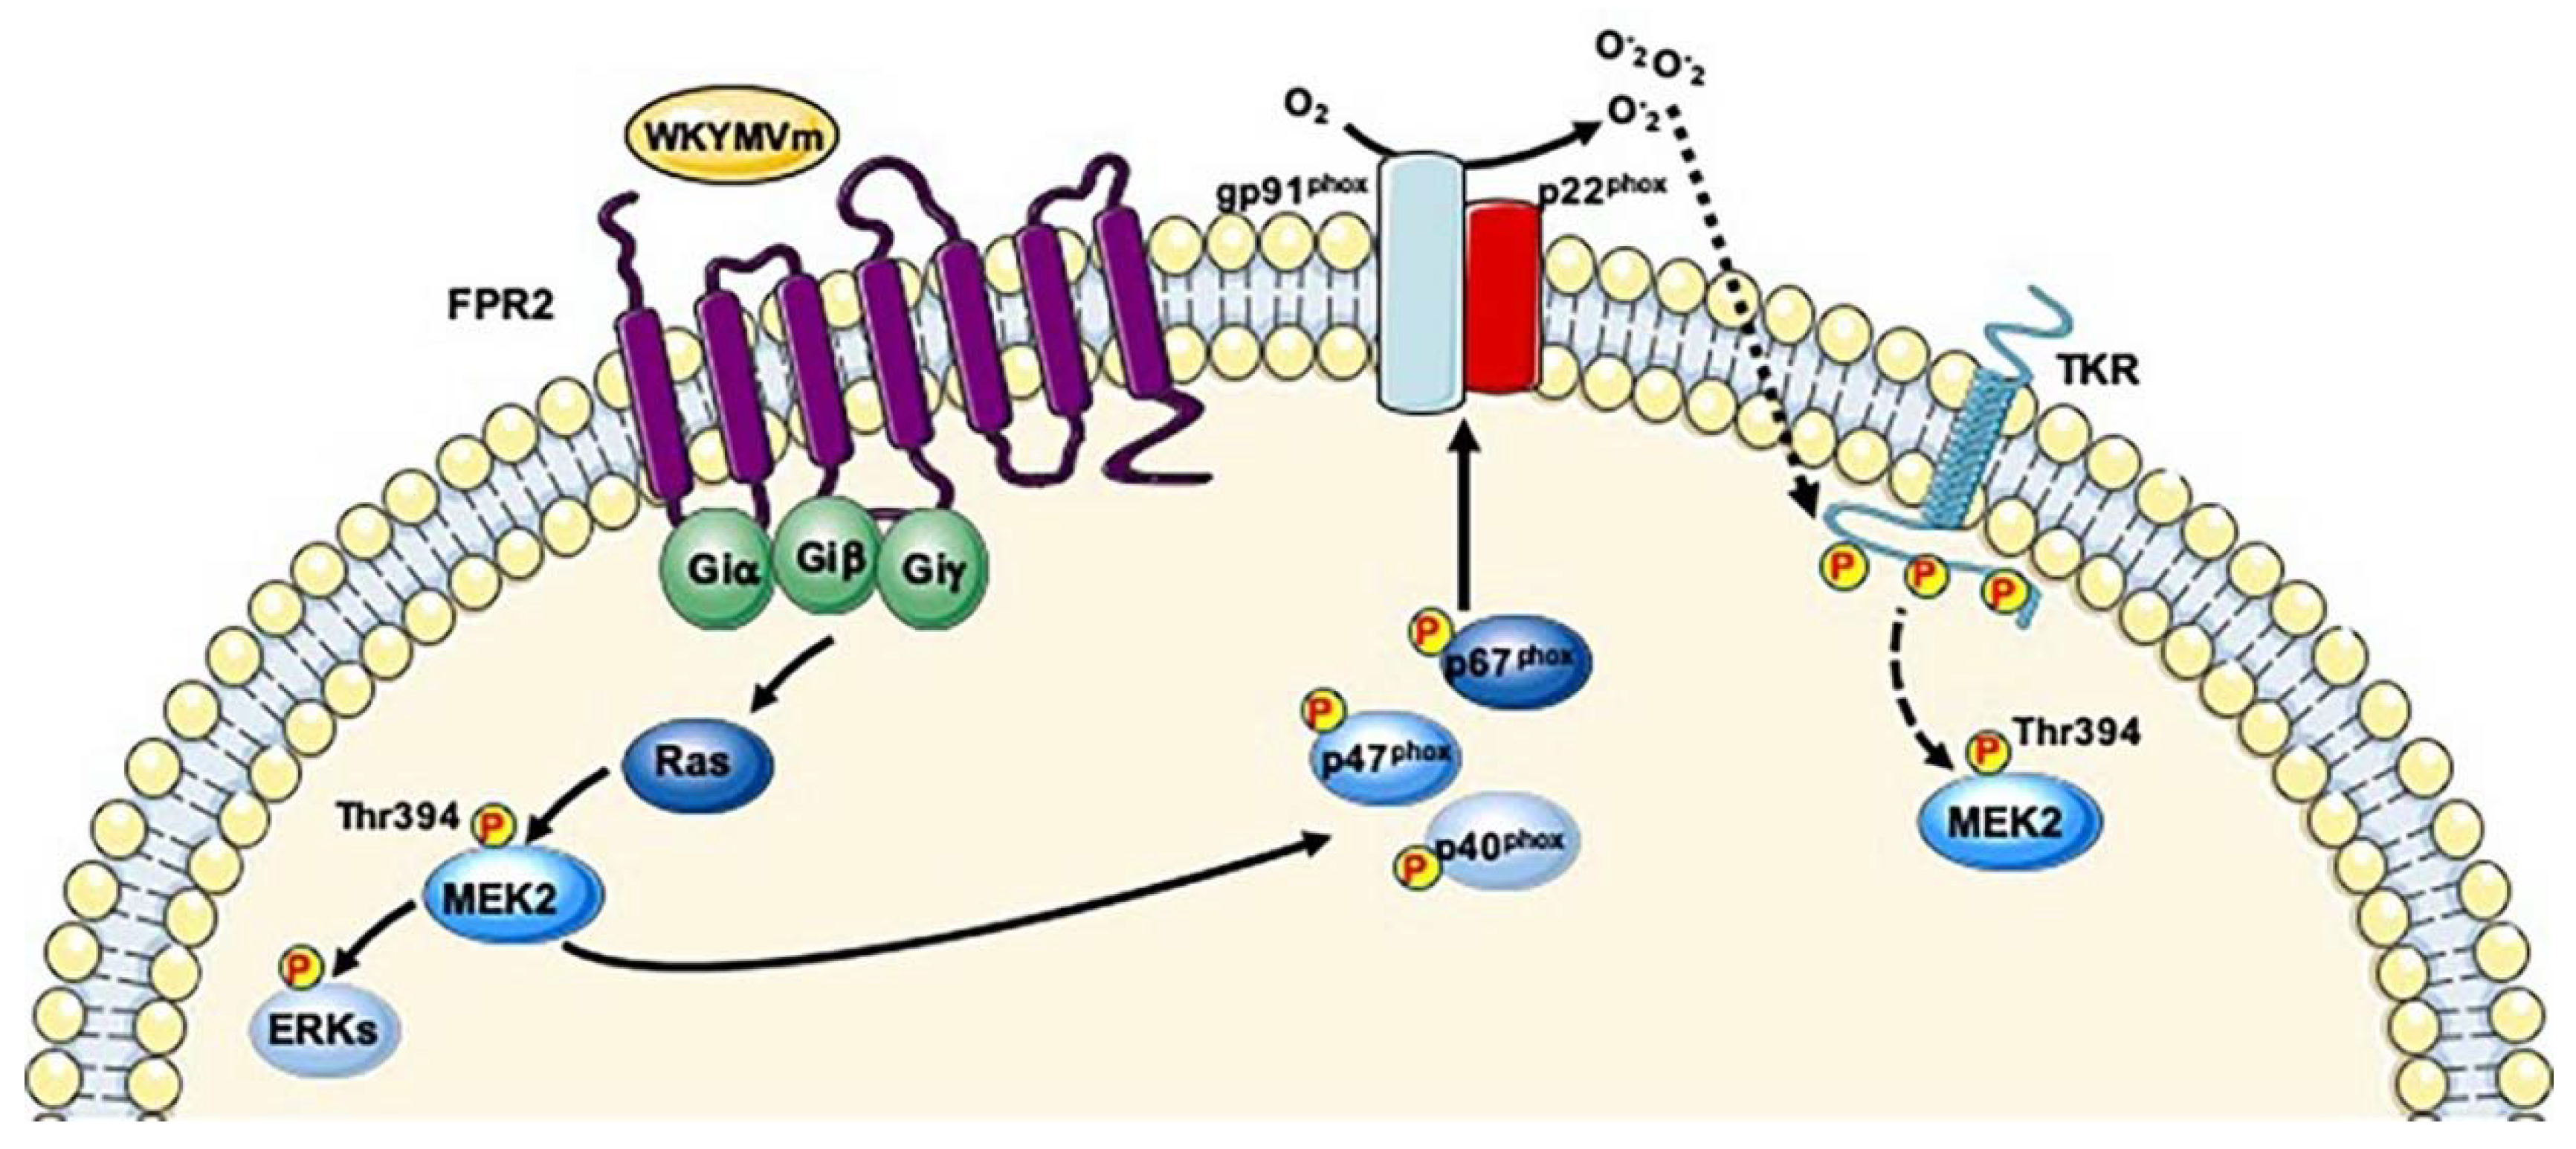 Ijms Free Full Text Phosphorylation Sites In Protein Kinases And Phosphatases Regulated By Formyl Peptide Receptor 2 Signaling Html